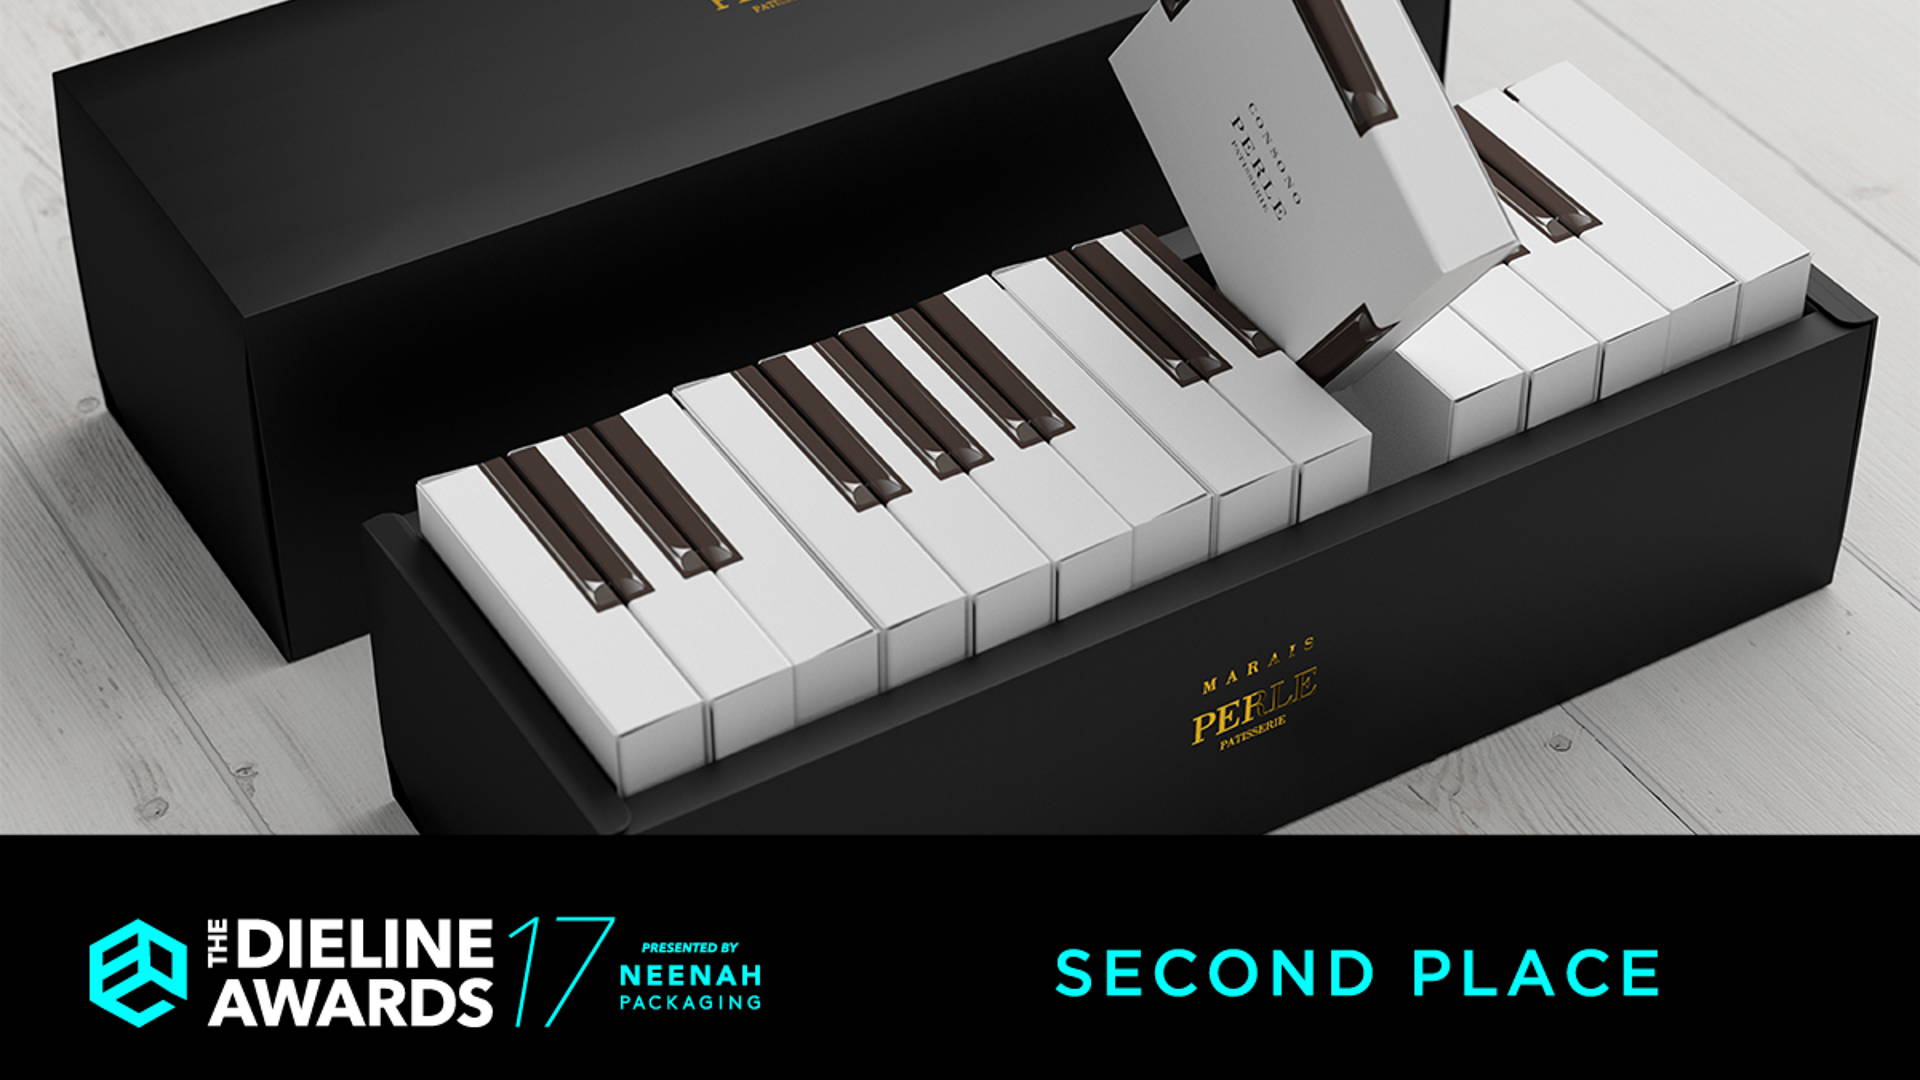 Featured image for The Dieline Awards 2017: MARAIS Piano Cake Packaging